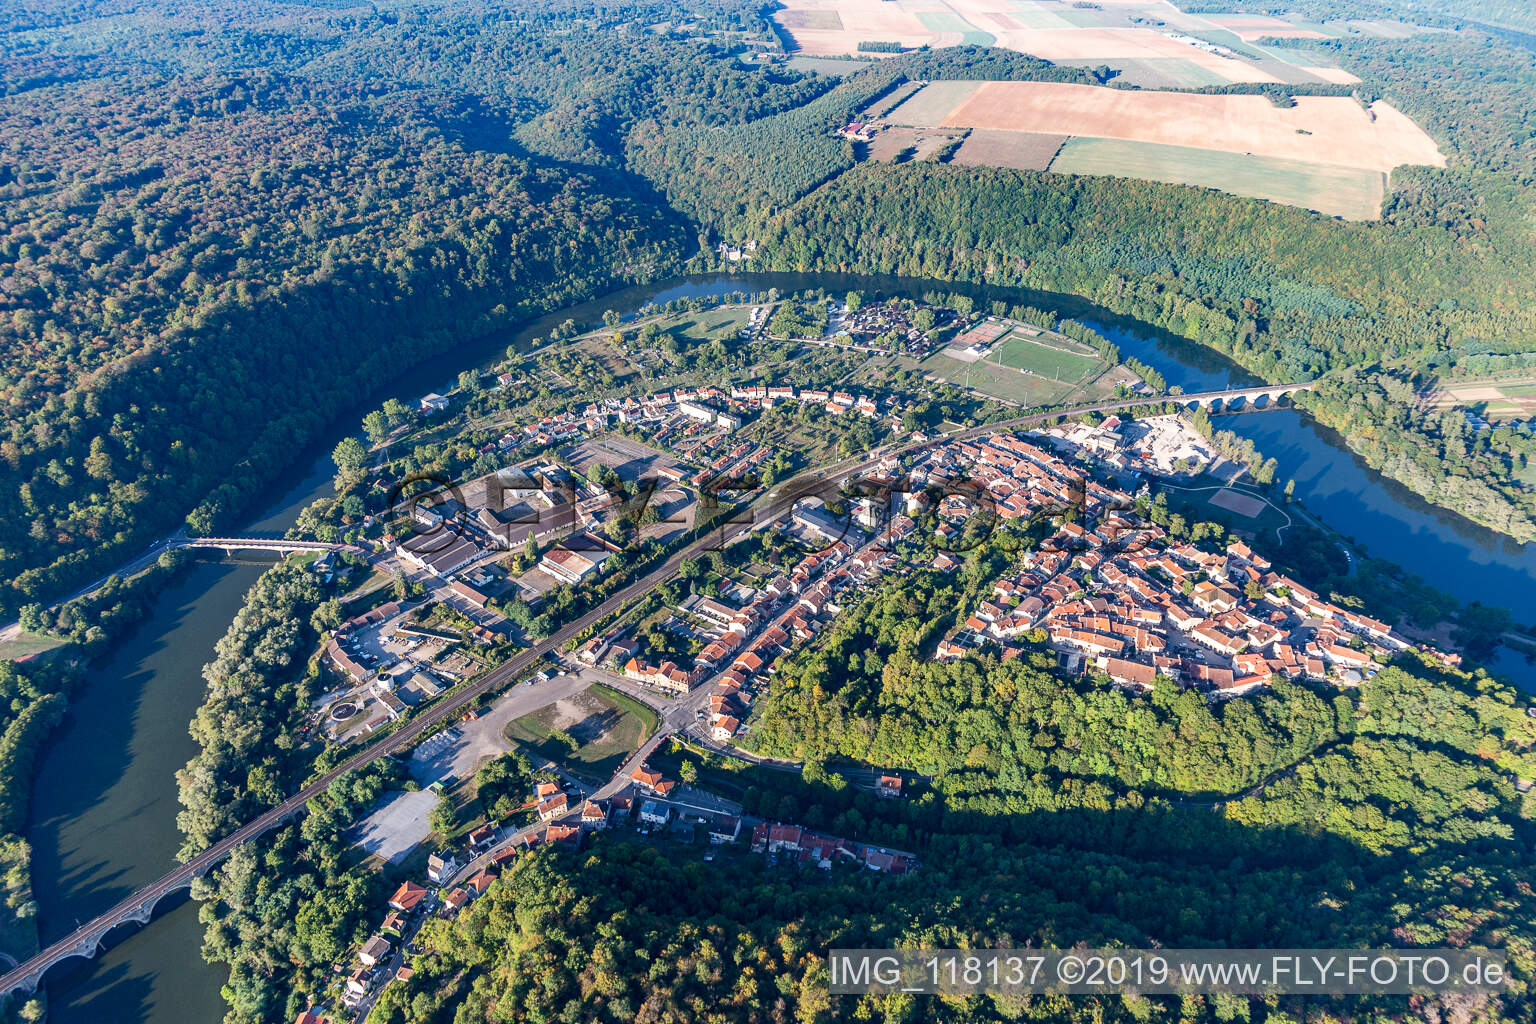 Aerial view of Liverdun in the state Meurthe et Moselle, France